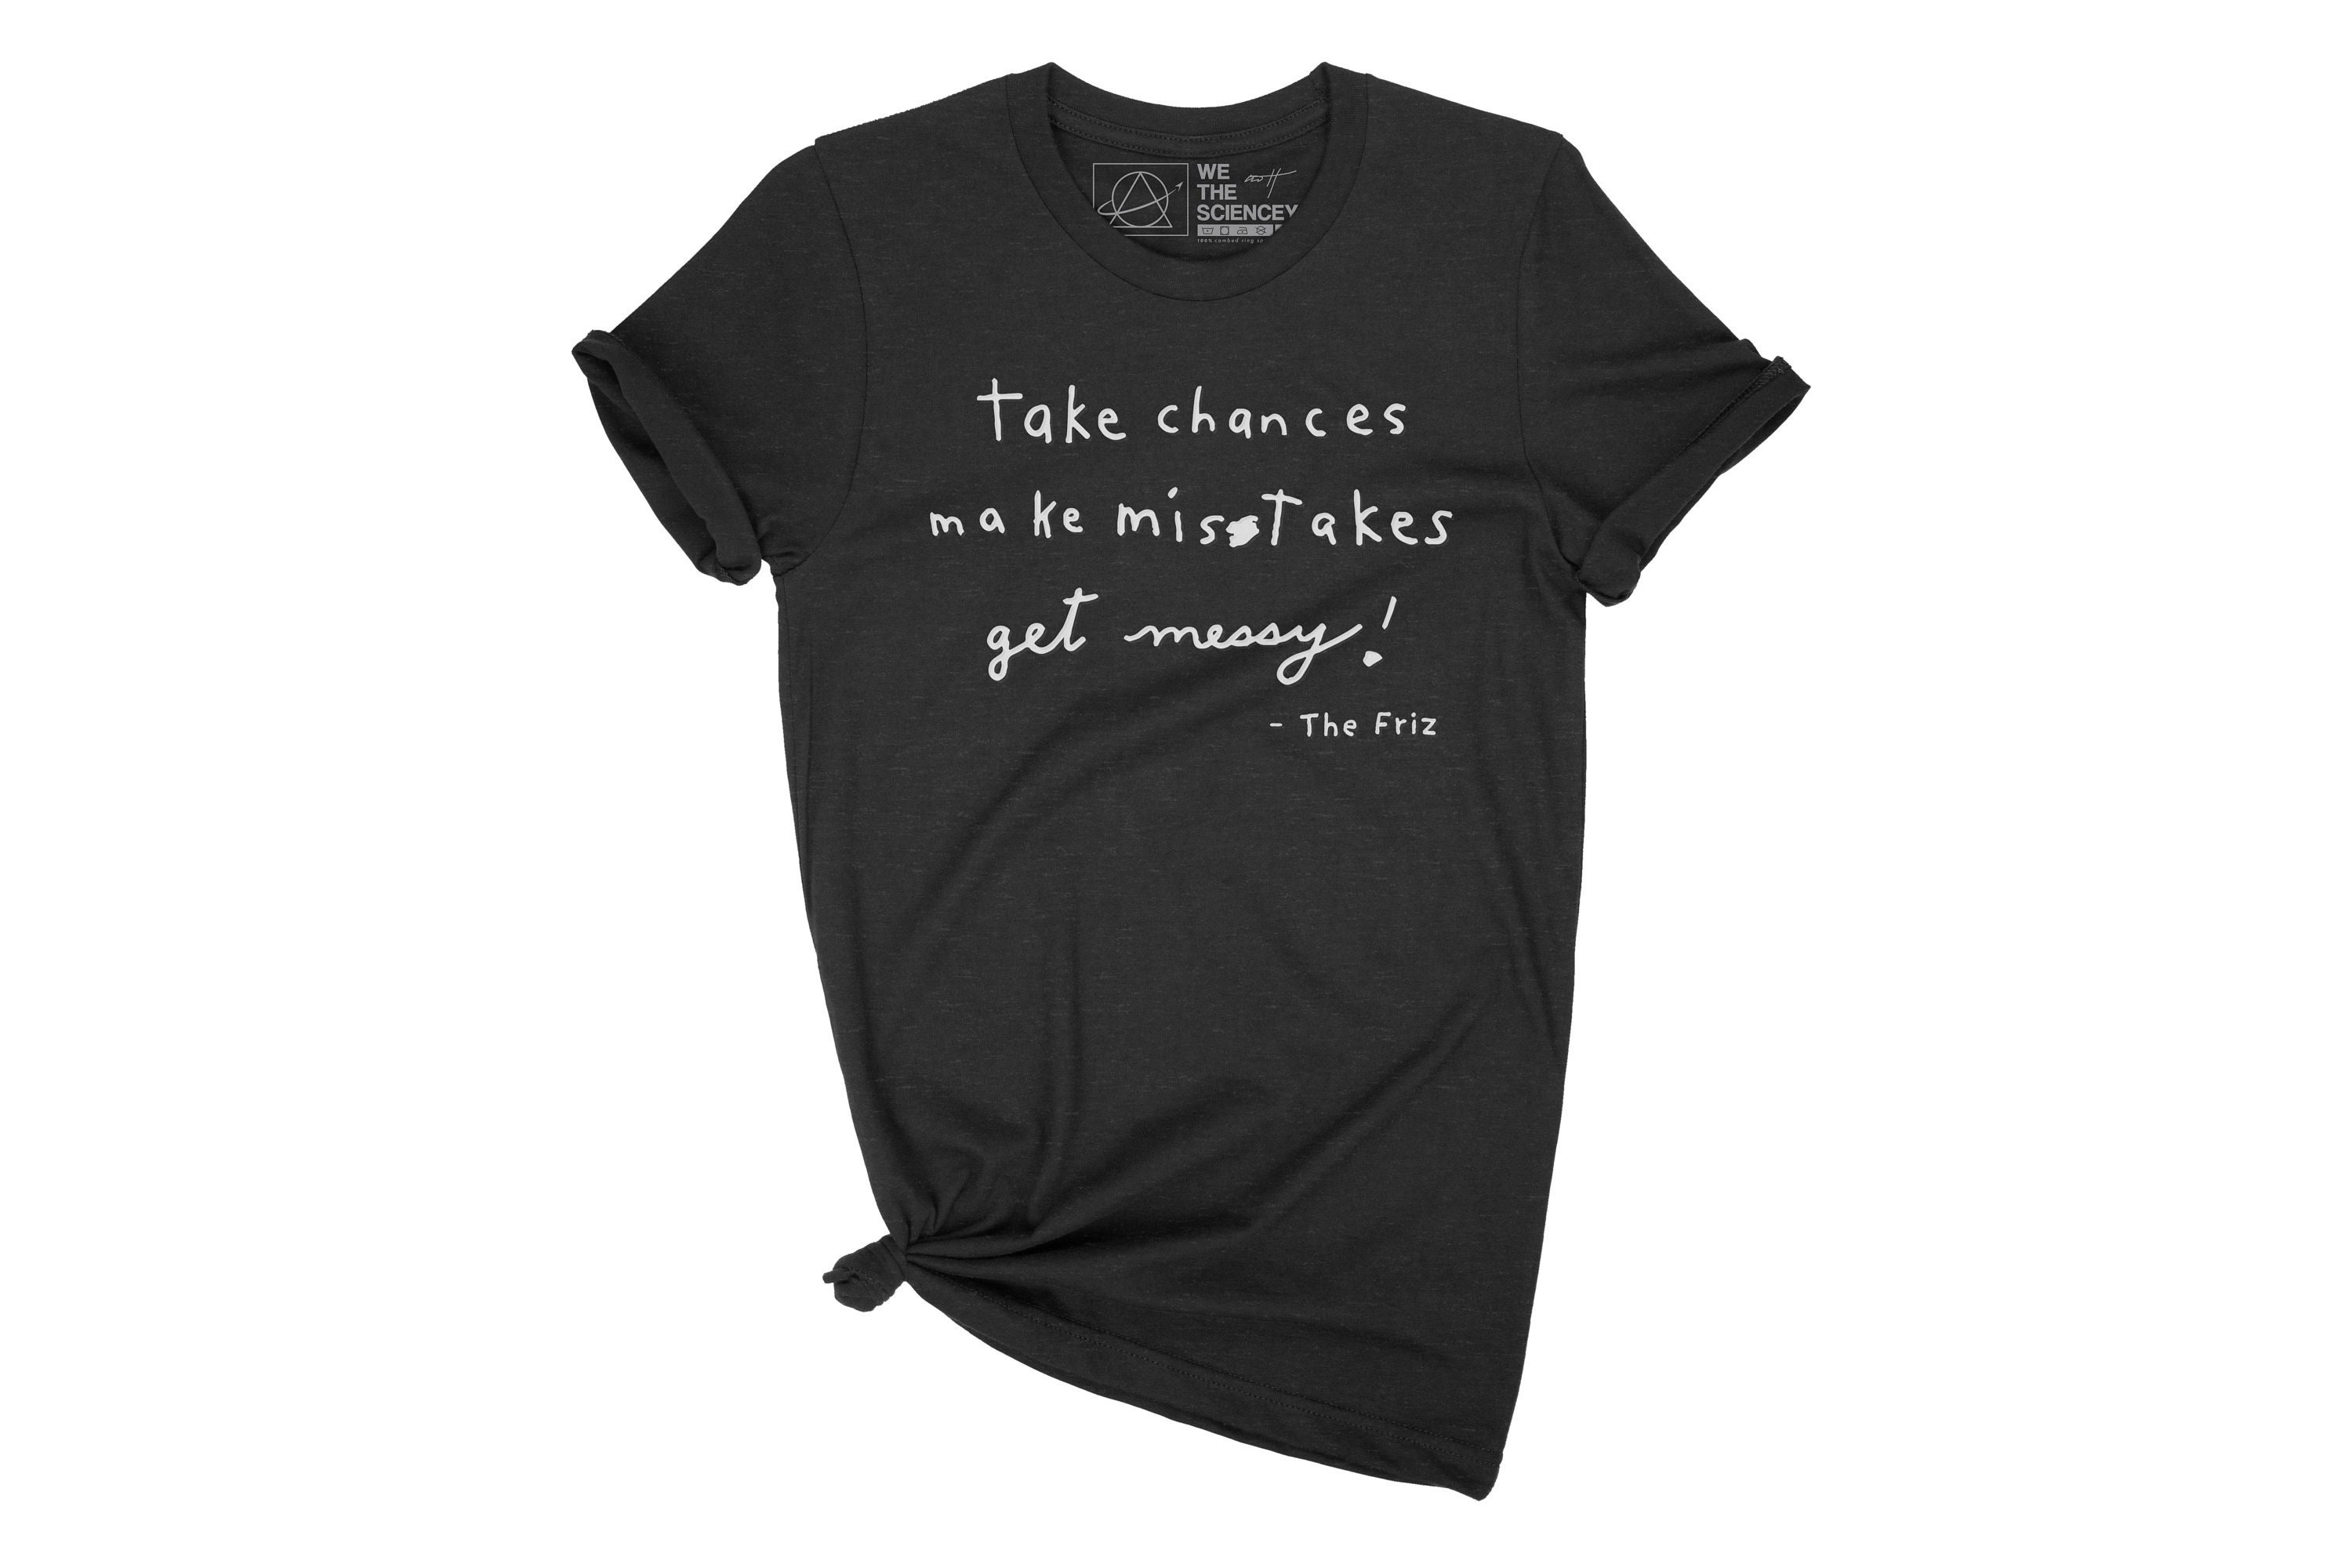 Magic School Bus Tee Teacher Life 2021 Take Chances Make Mistakes Get Messy Shirt Miss Frizzle Quote Ms Frizzle Shirt